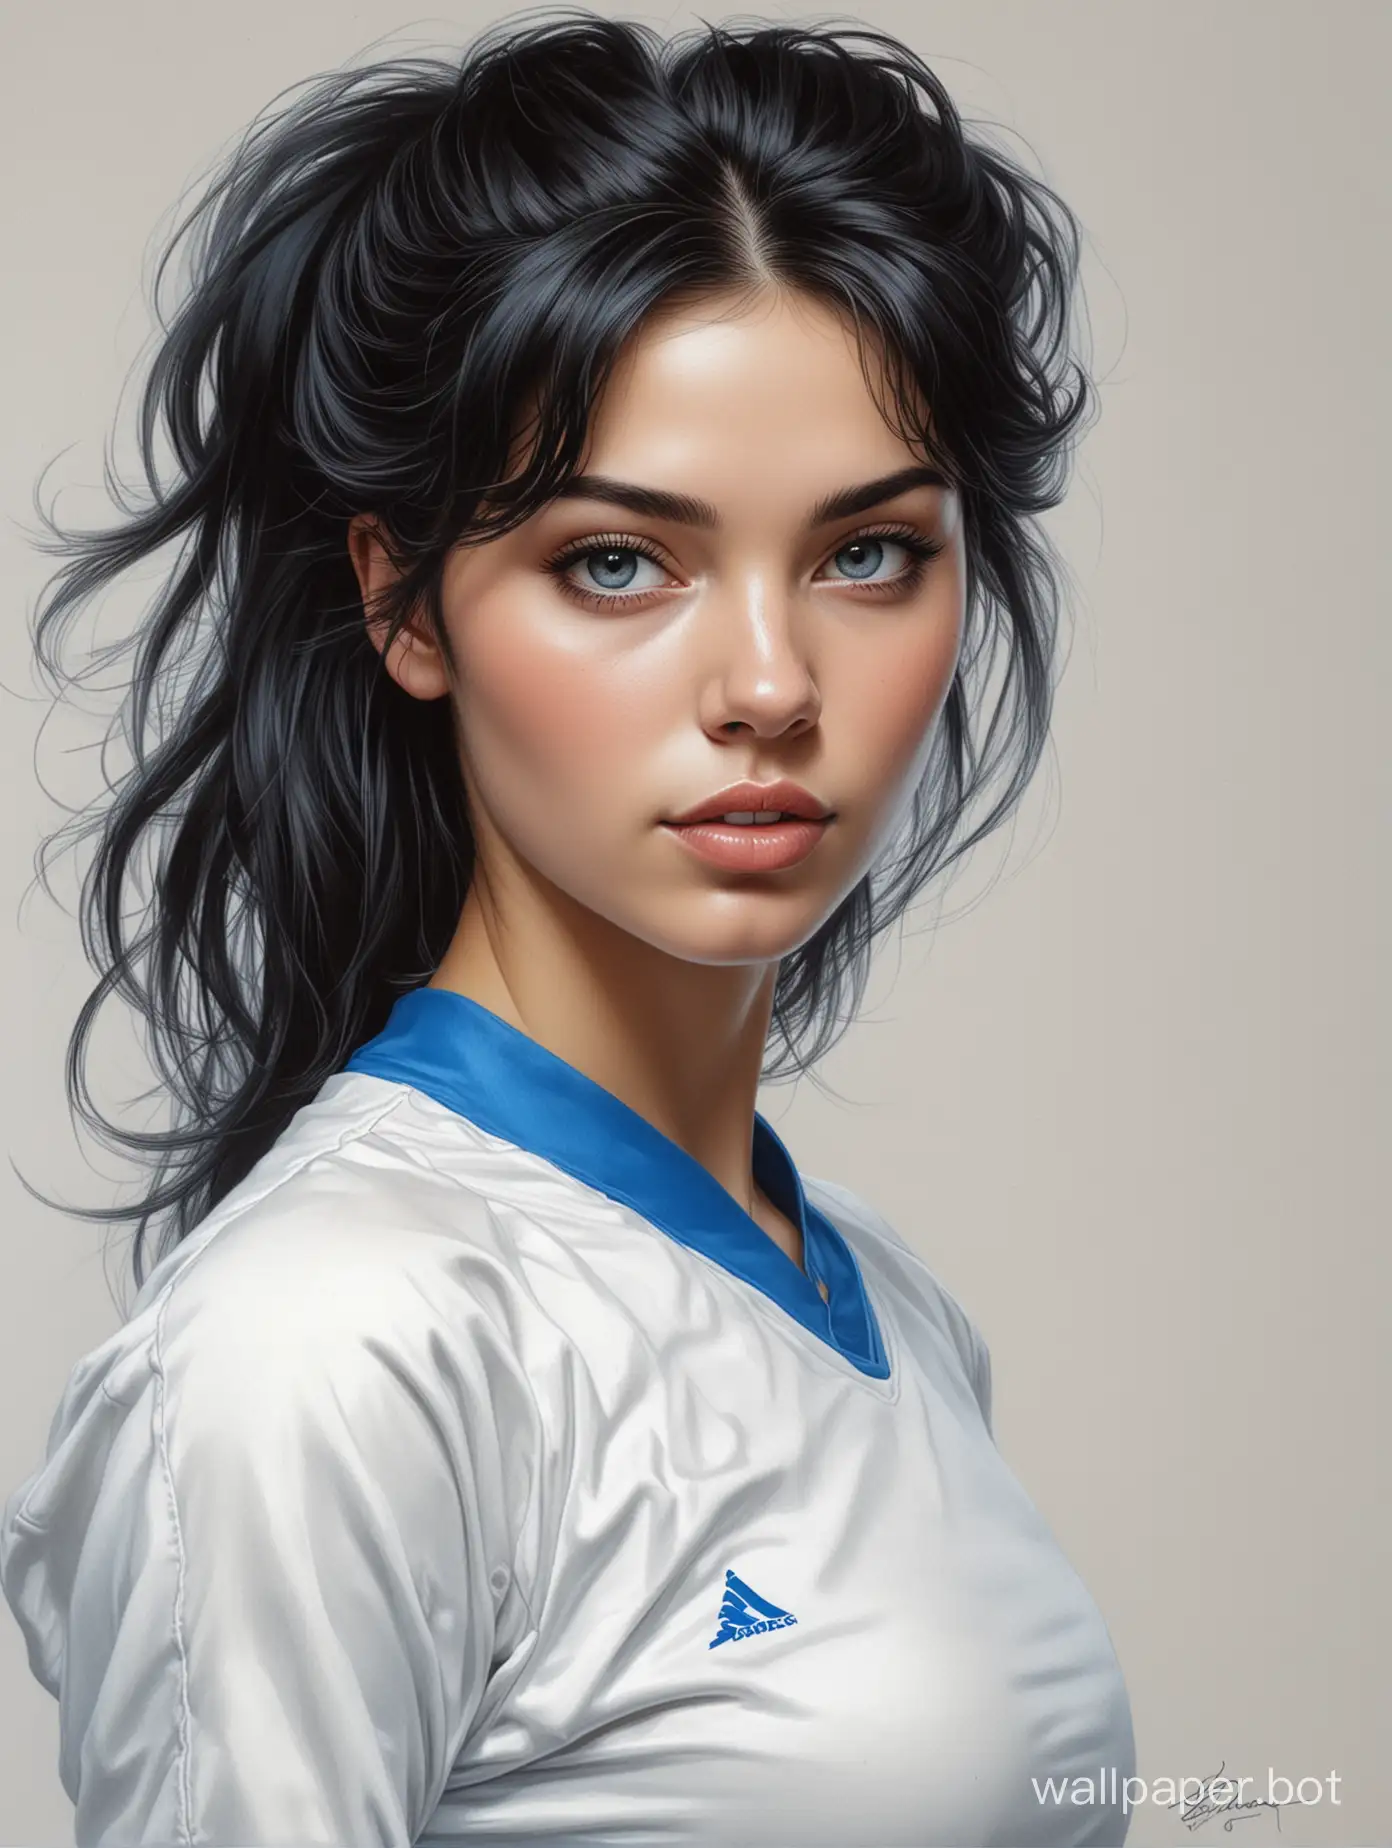 Portrait-Drawing-of-Young-Katerina-Shpitsa-in-Soccer-Uniform-on-White-Background